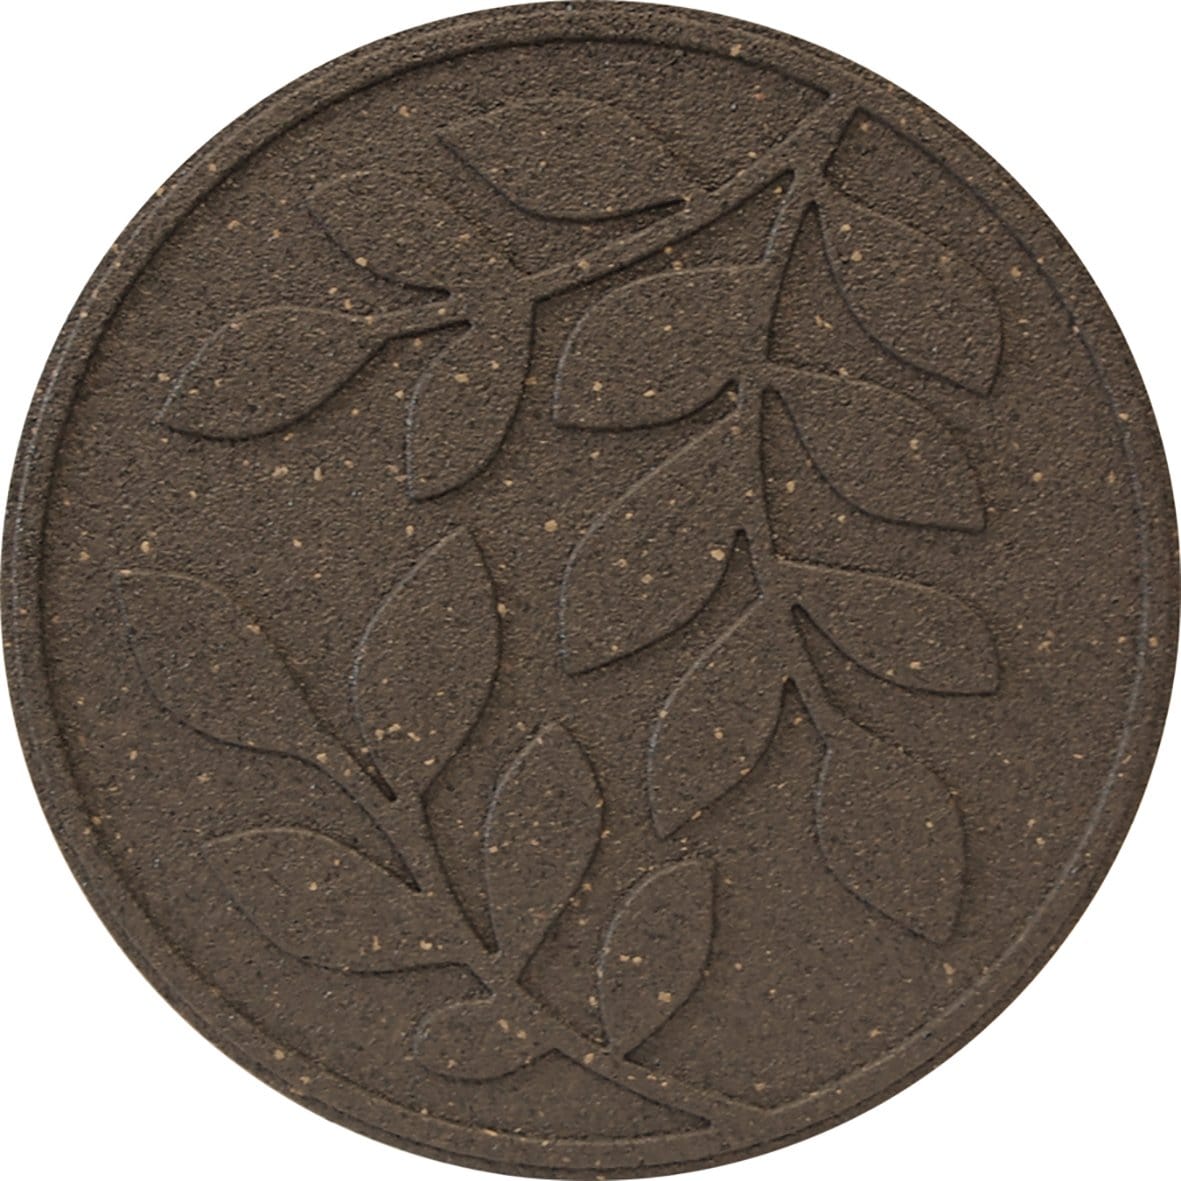 Brown stepping stone with leaf pattern - Safer Surfacing